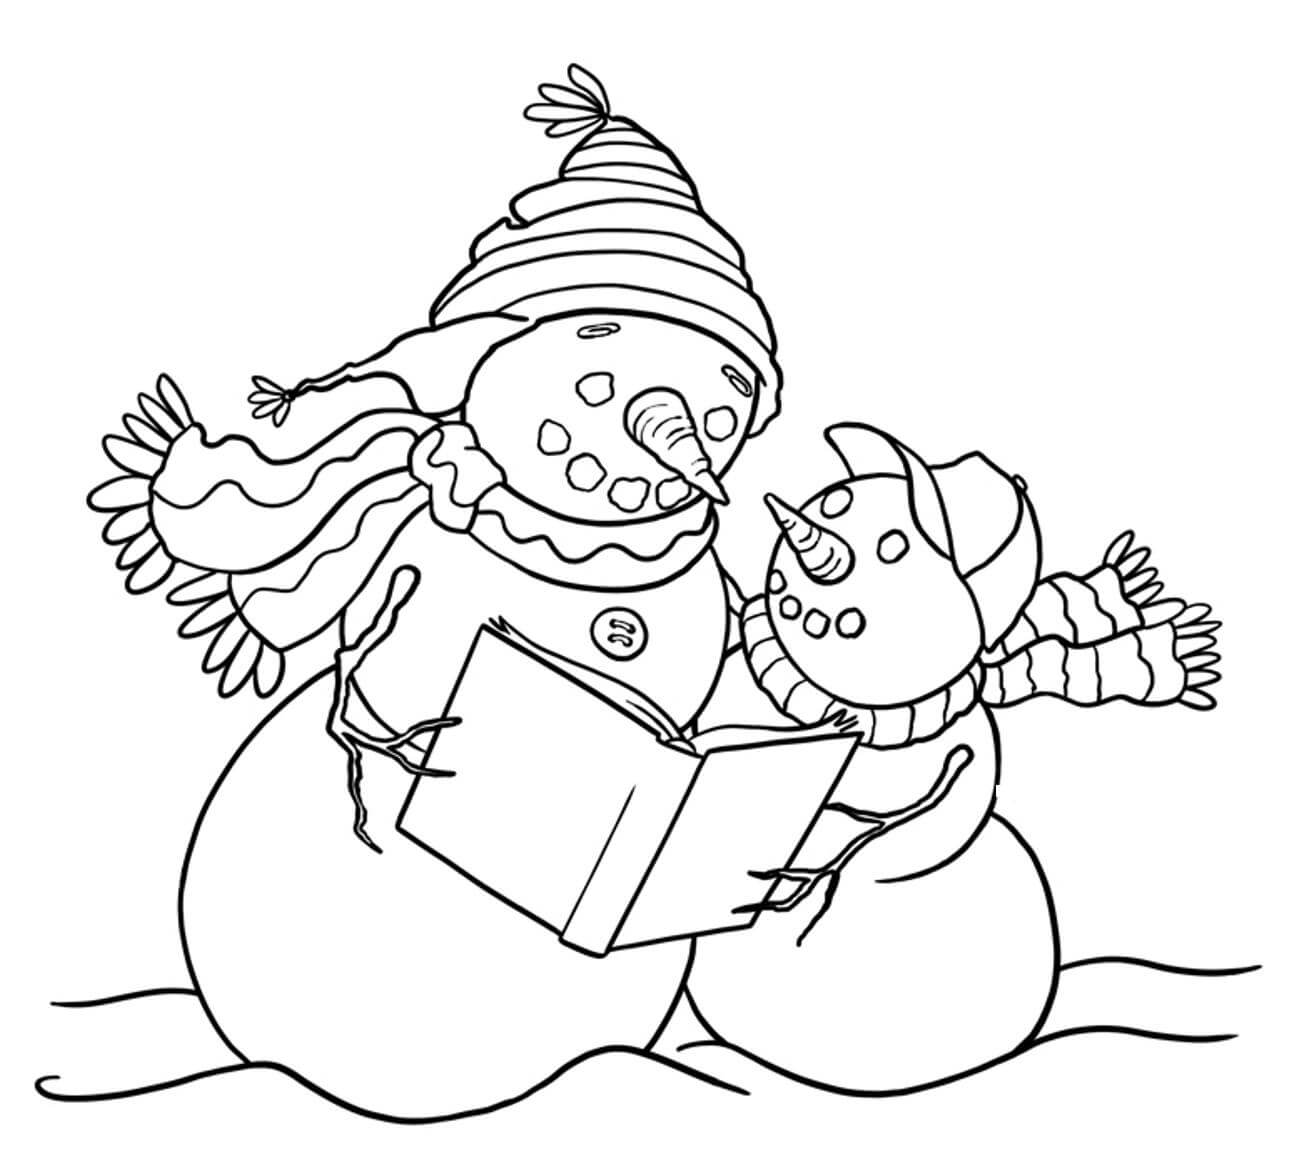 Snowman and Son Coloring Pages